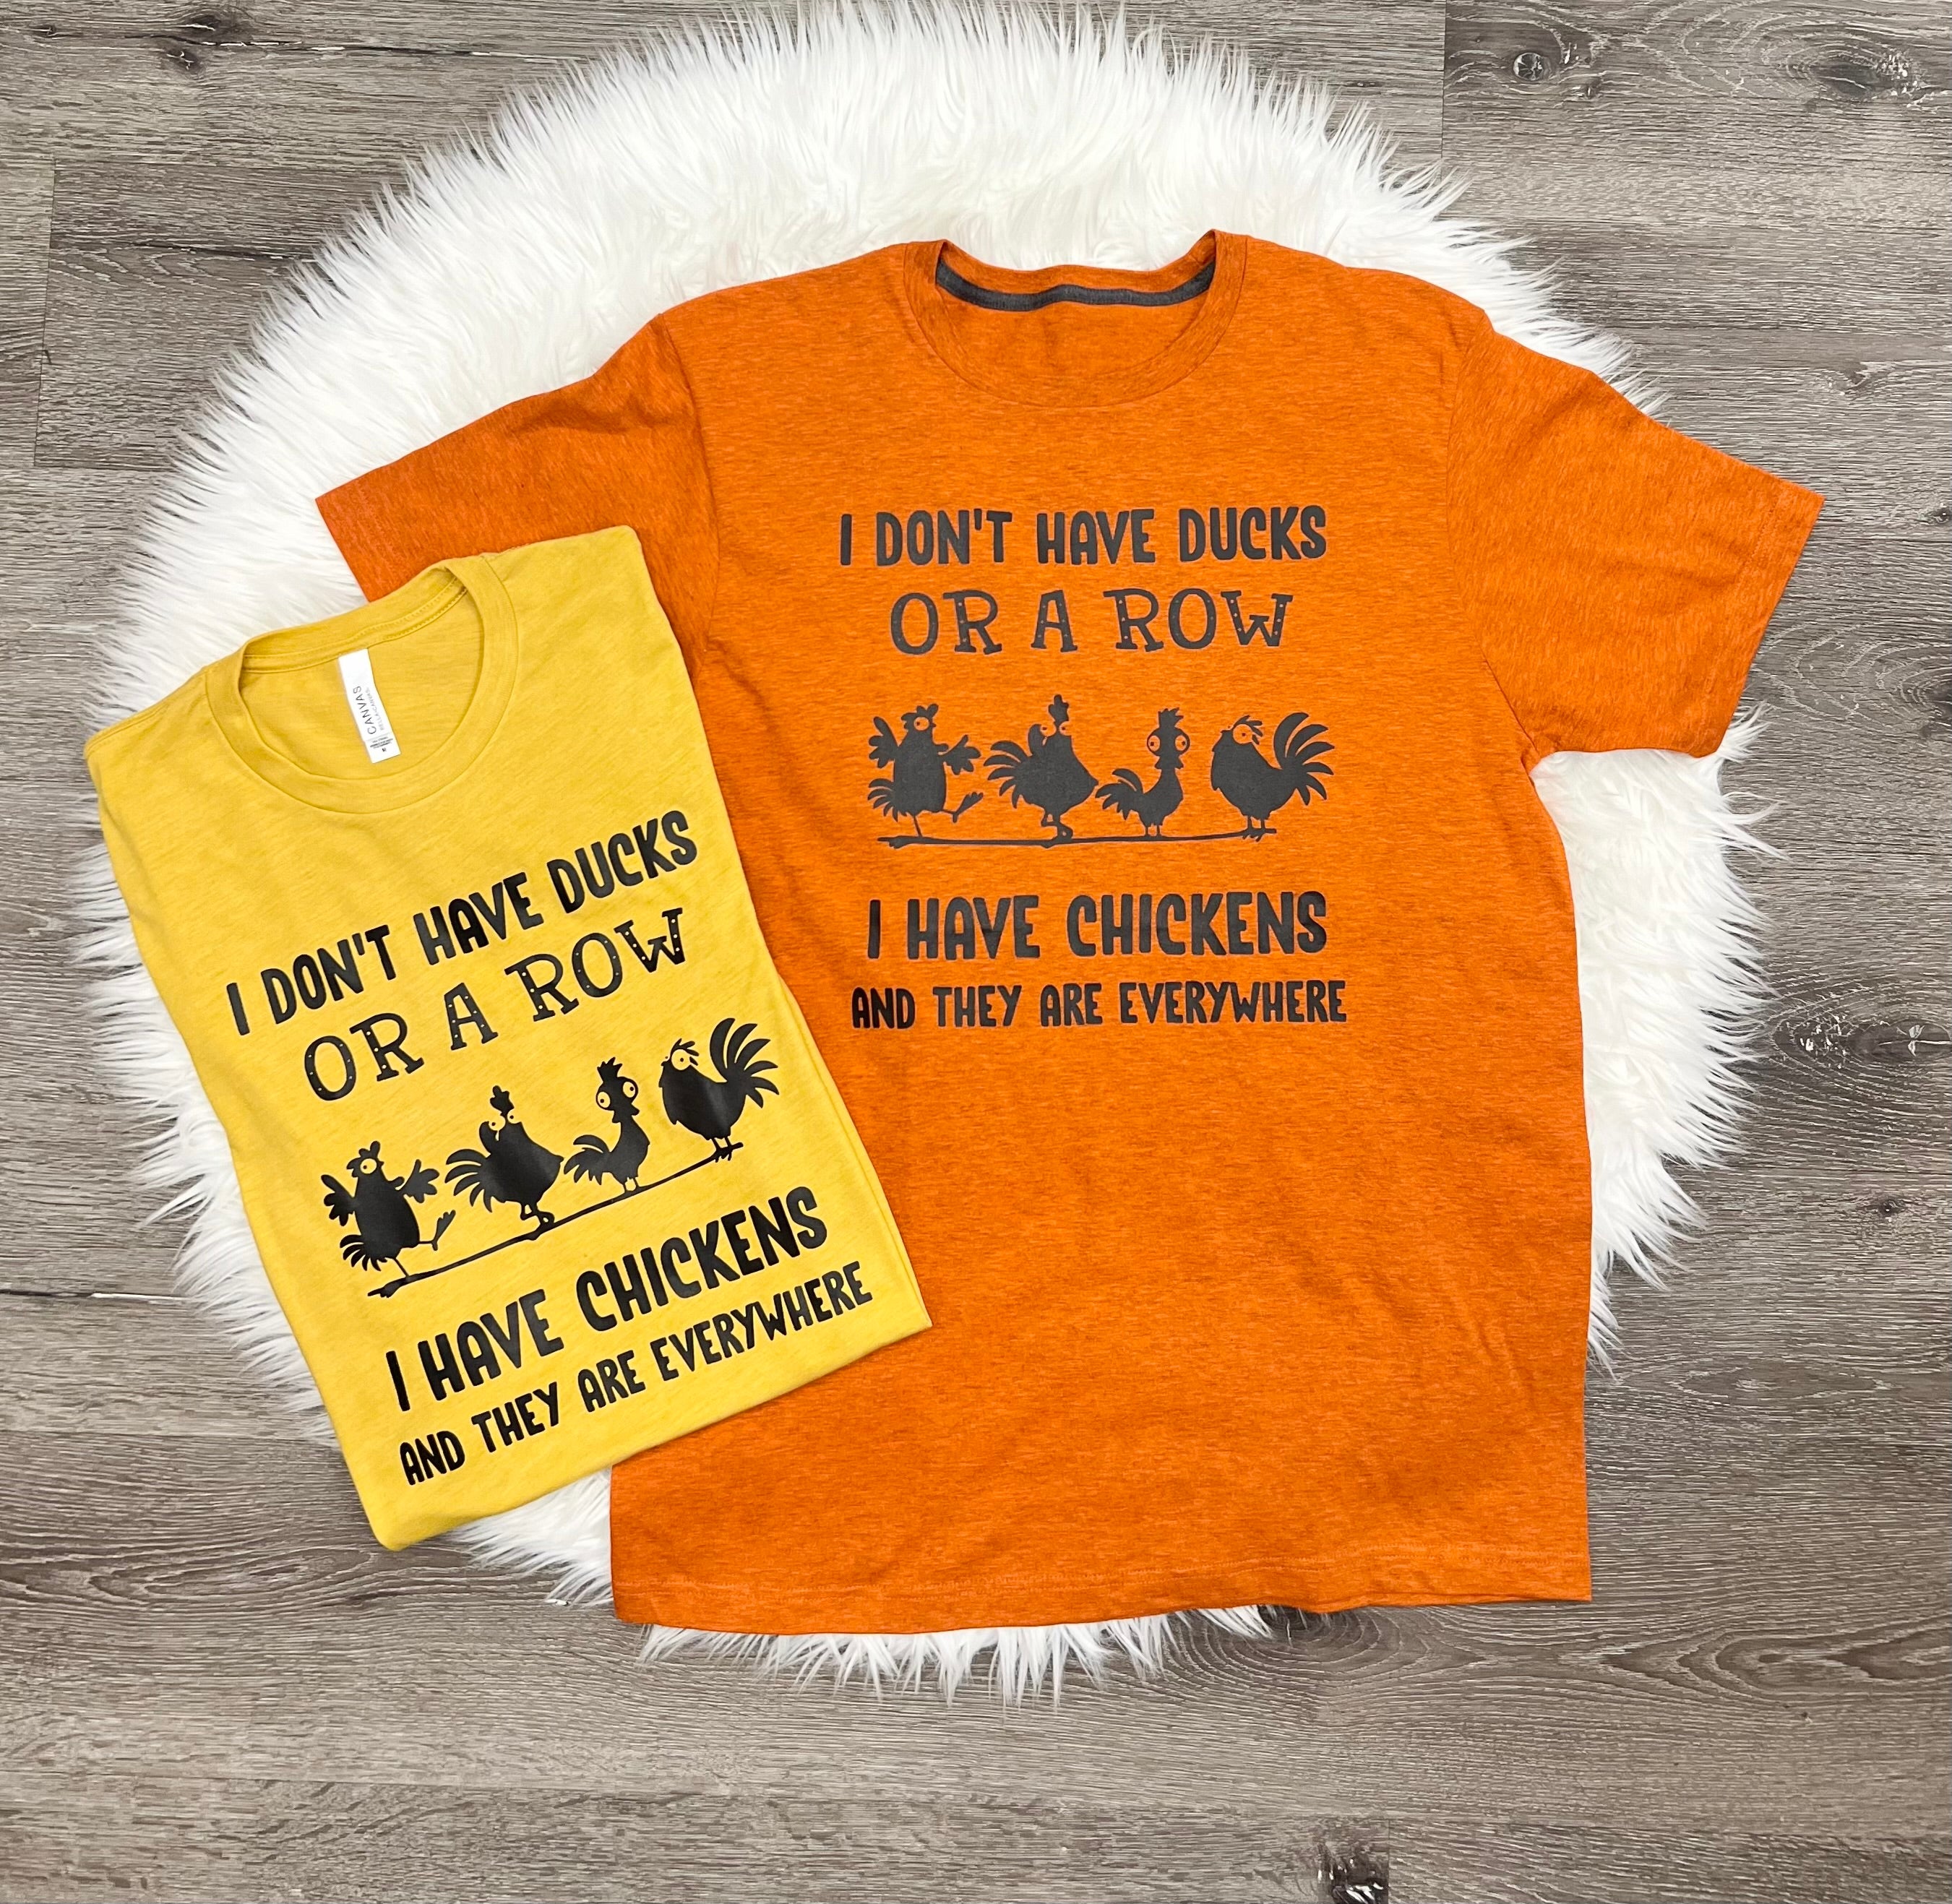 I Have Chickens T-Shirt